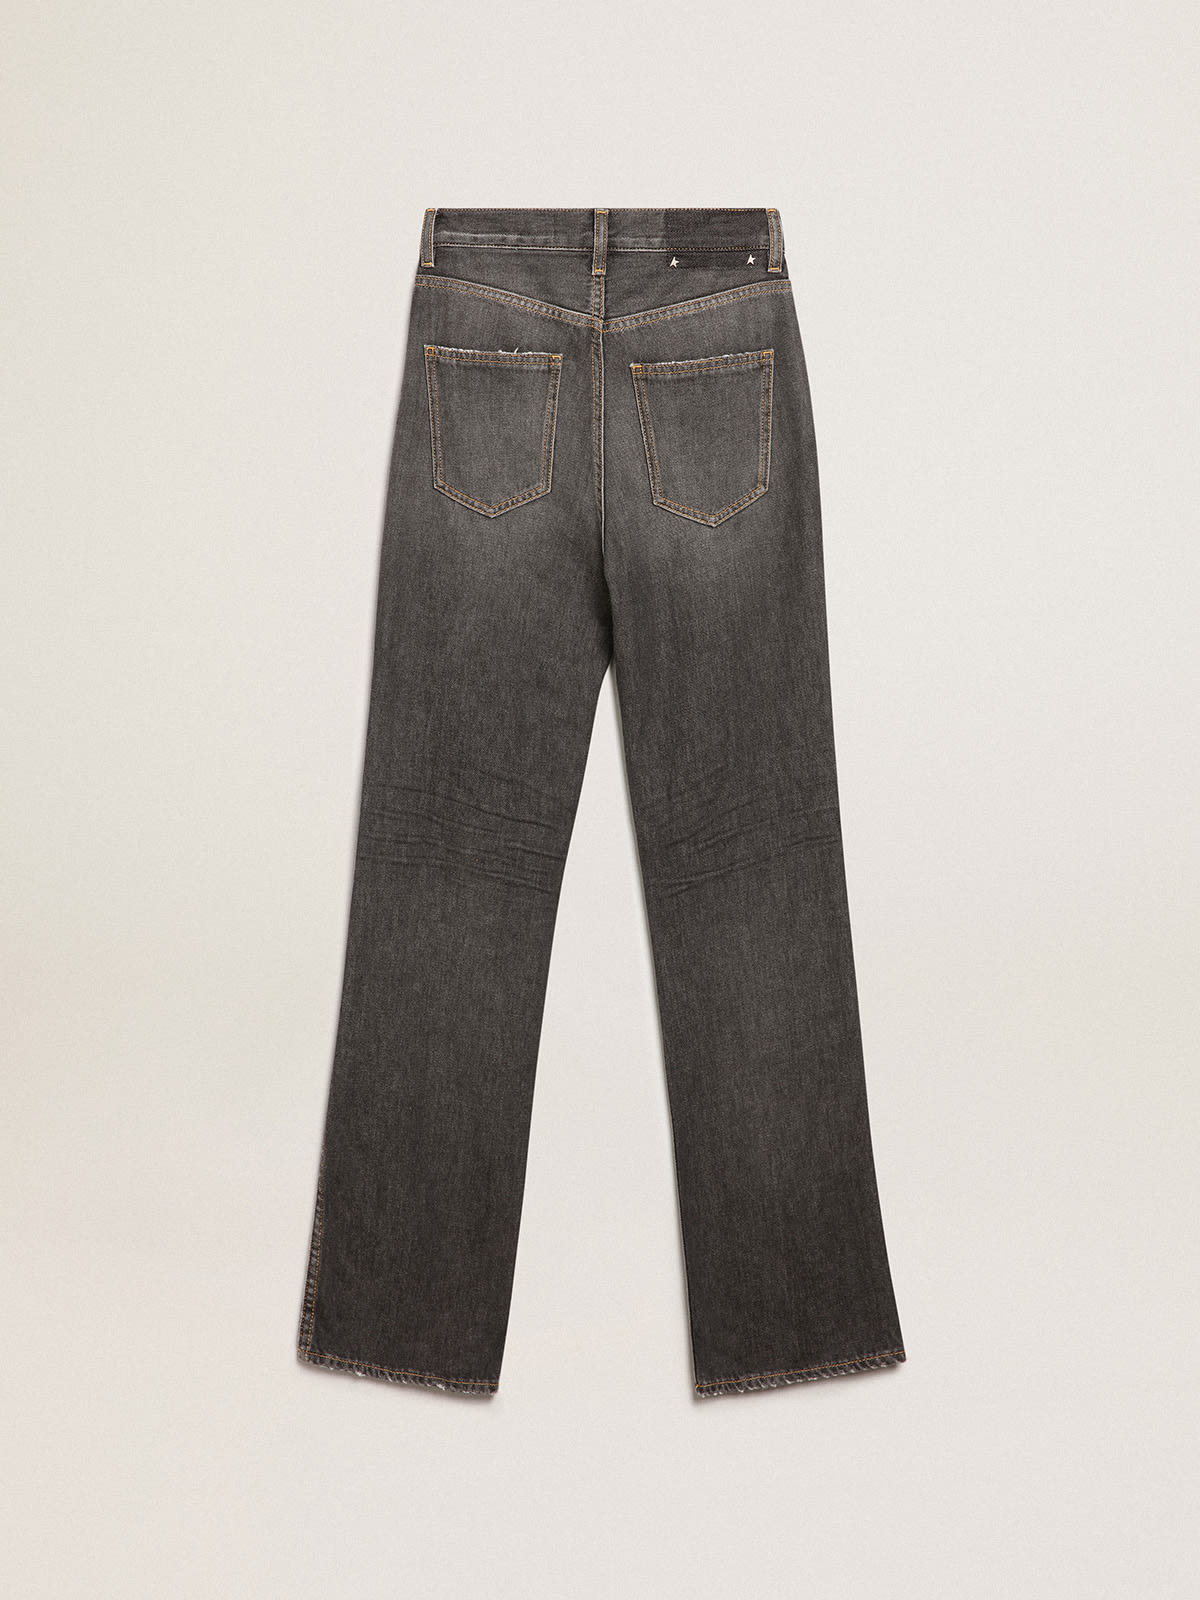 Golden Goose - Women's black jeans with stonewashed effect in 